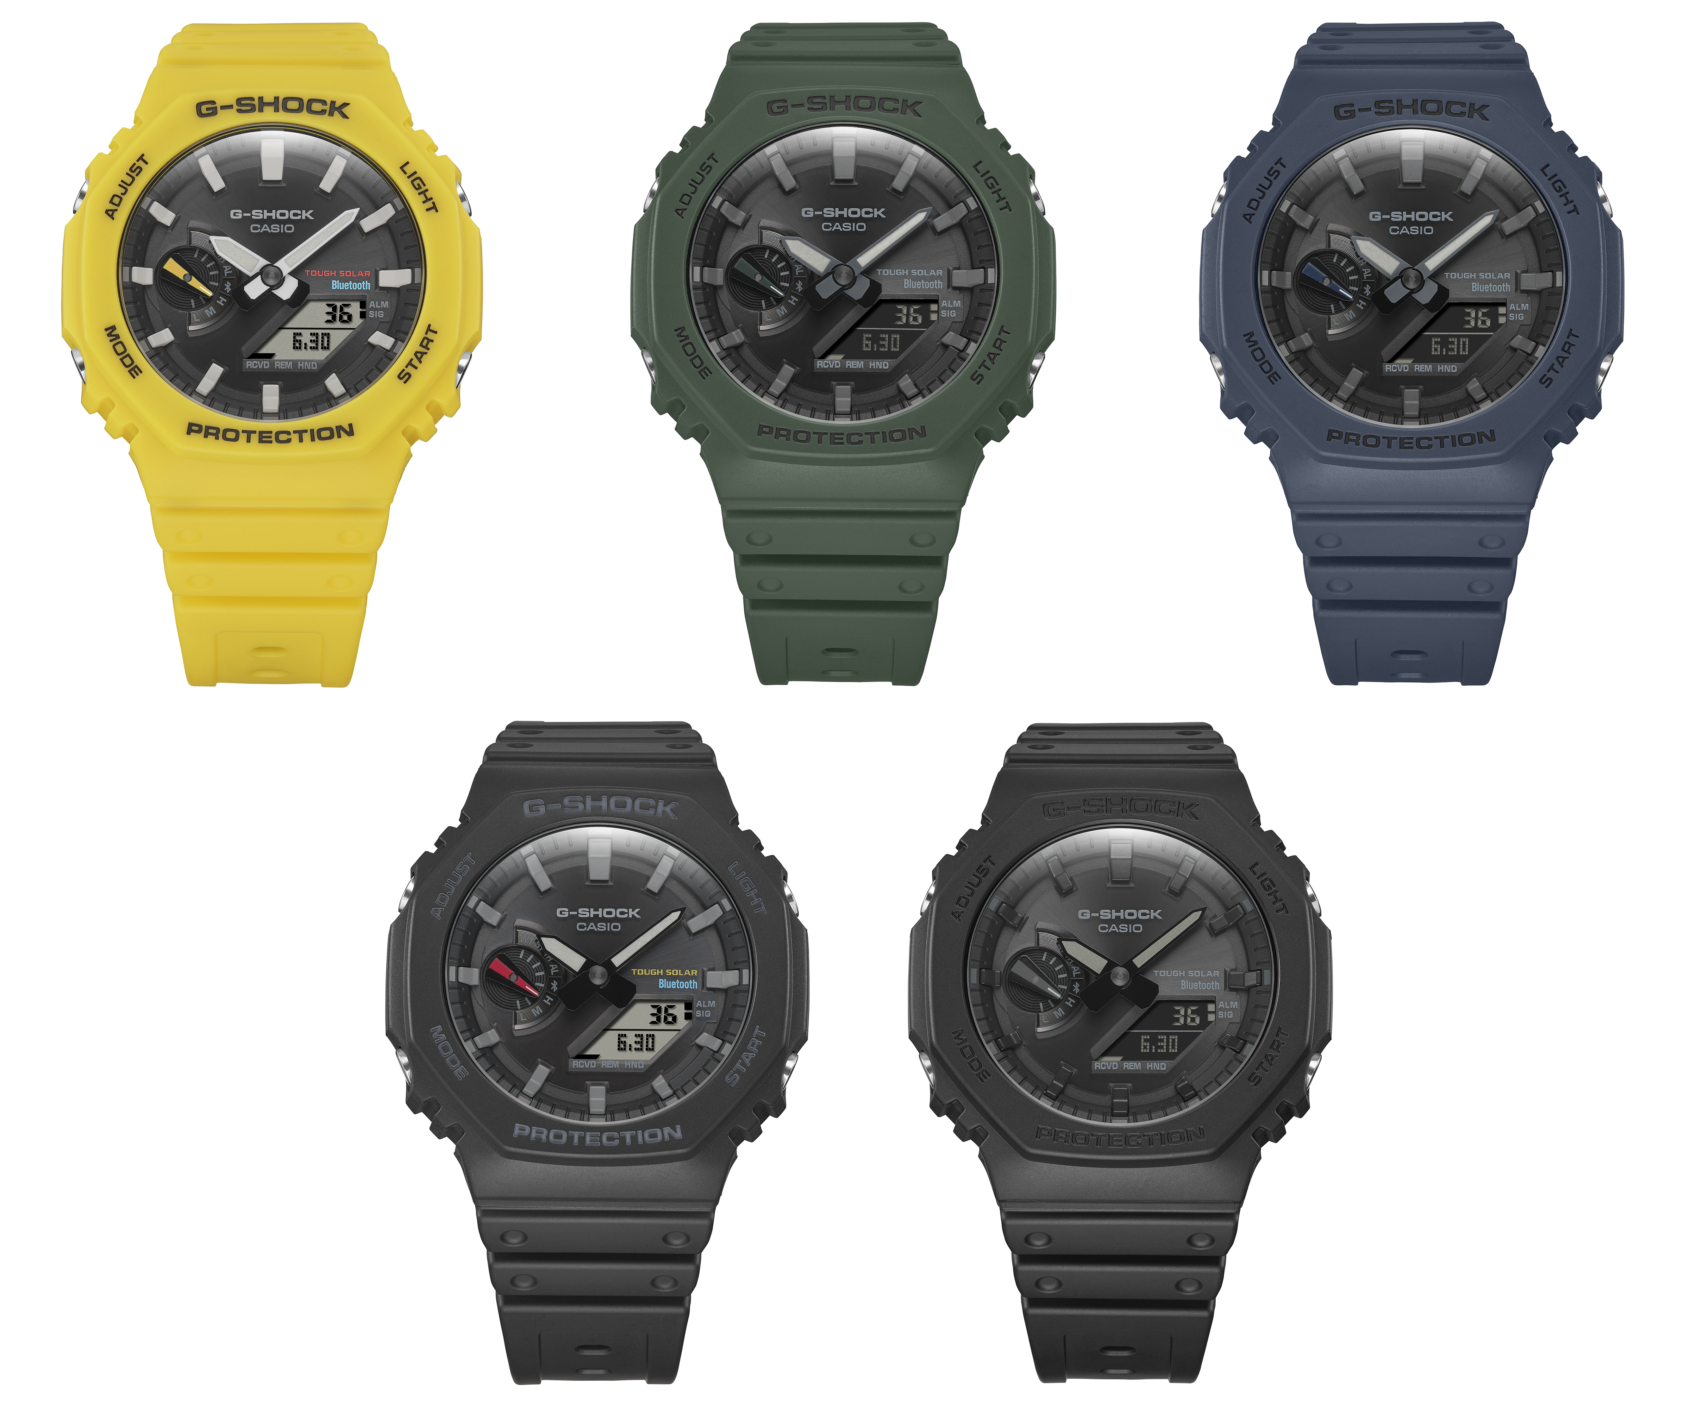 The new G-Shock GA-B2100 Adds Serious Functionality To The CasiOak